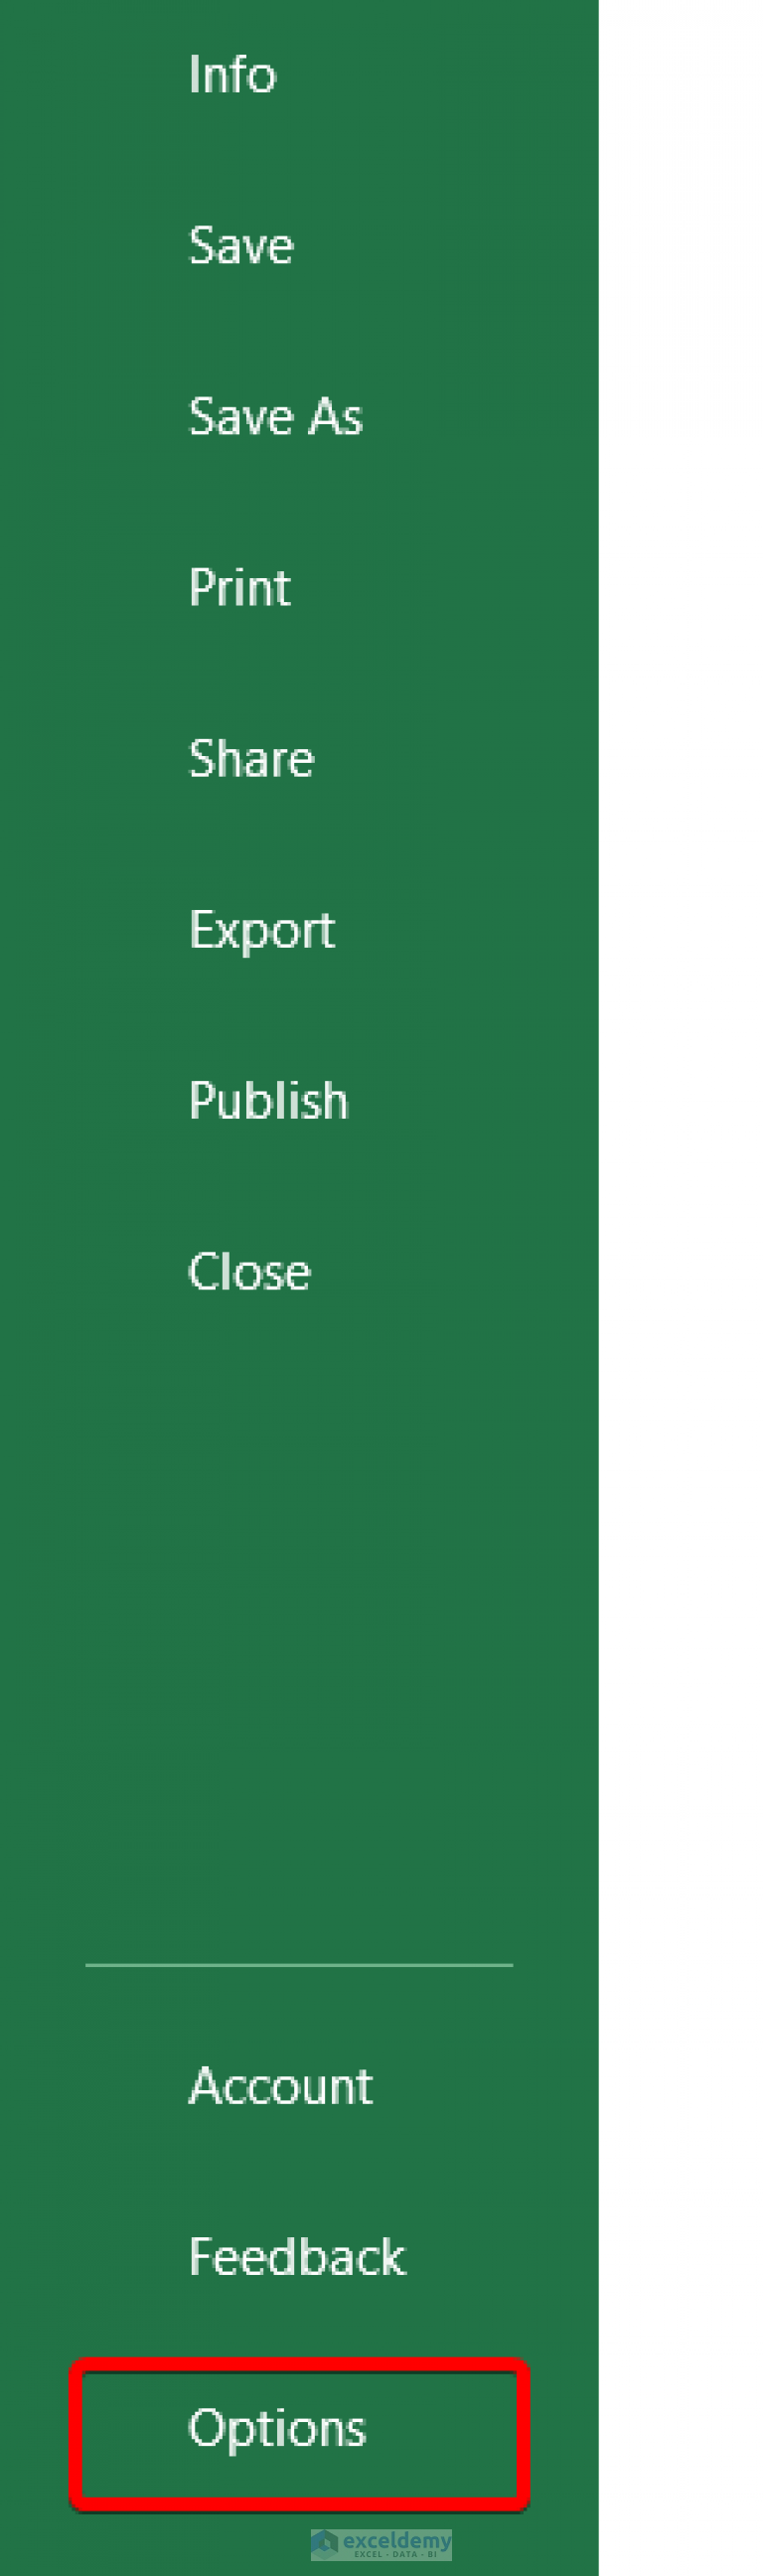 fixed-excel-protected-view-editing-this-file-type-is-not-allowed